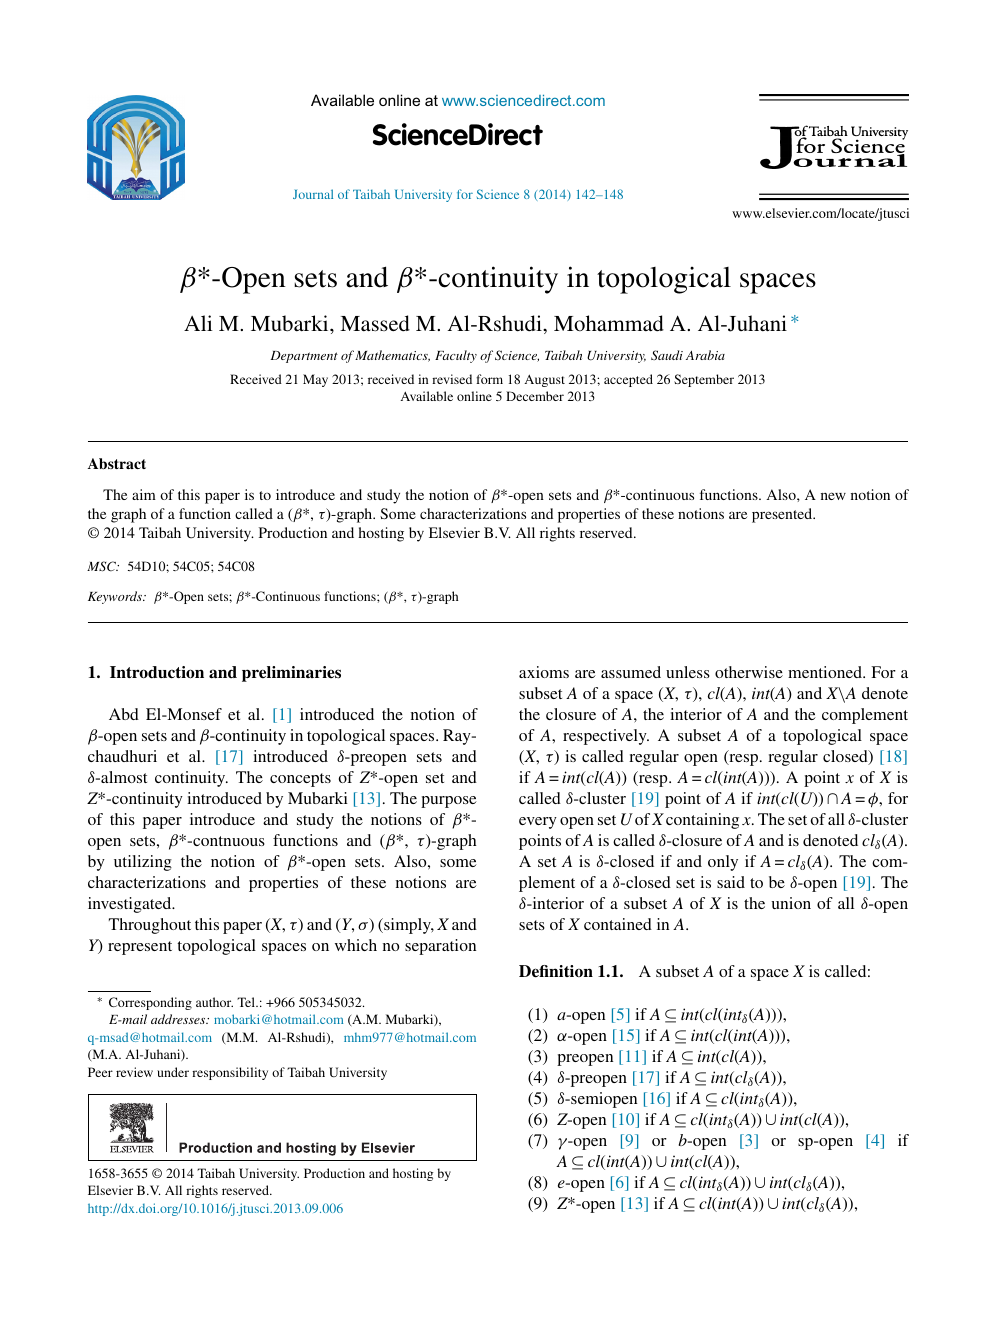 B Open Sets And B Continuity In Topological Spaces Topic Of Research Paper In Mathematics Download Scholarly Article Pdf And Read For Free On Cyberleninka Open Science Hub